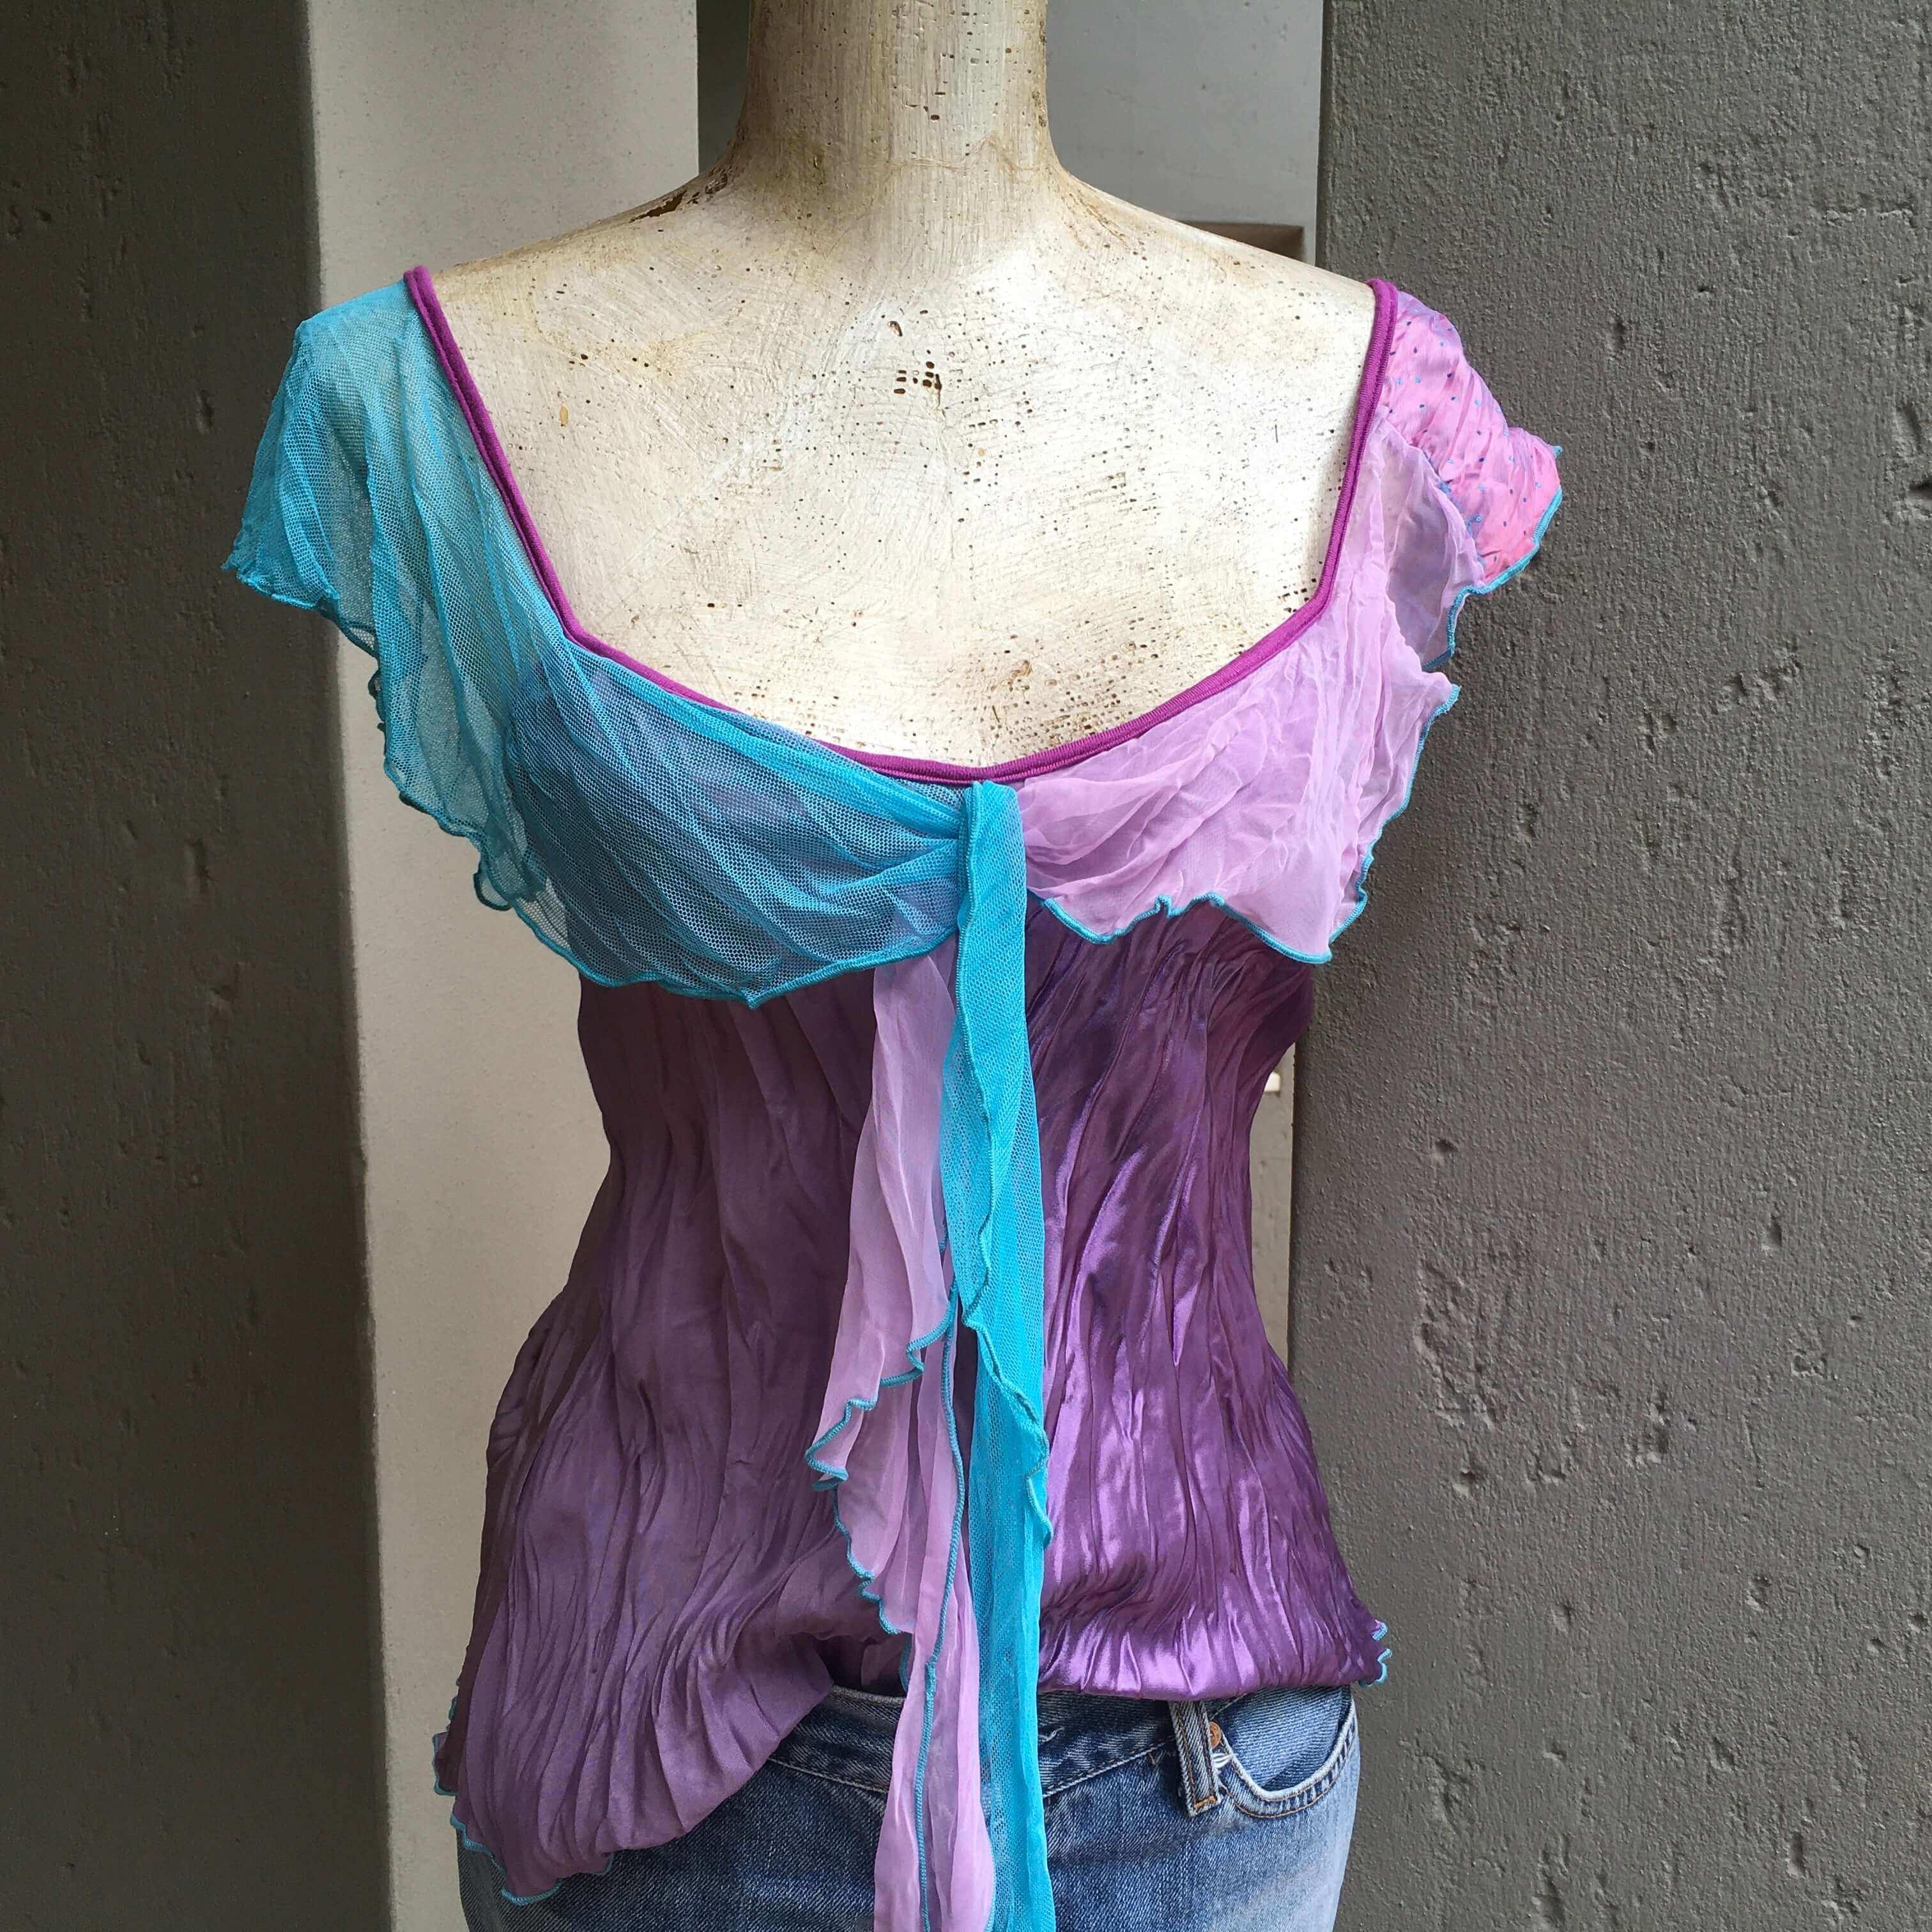 Outdoors view of camisole, worn with a pair of jeans.